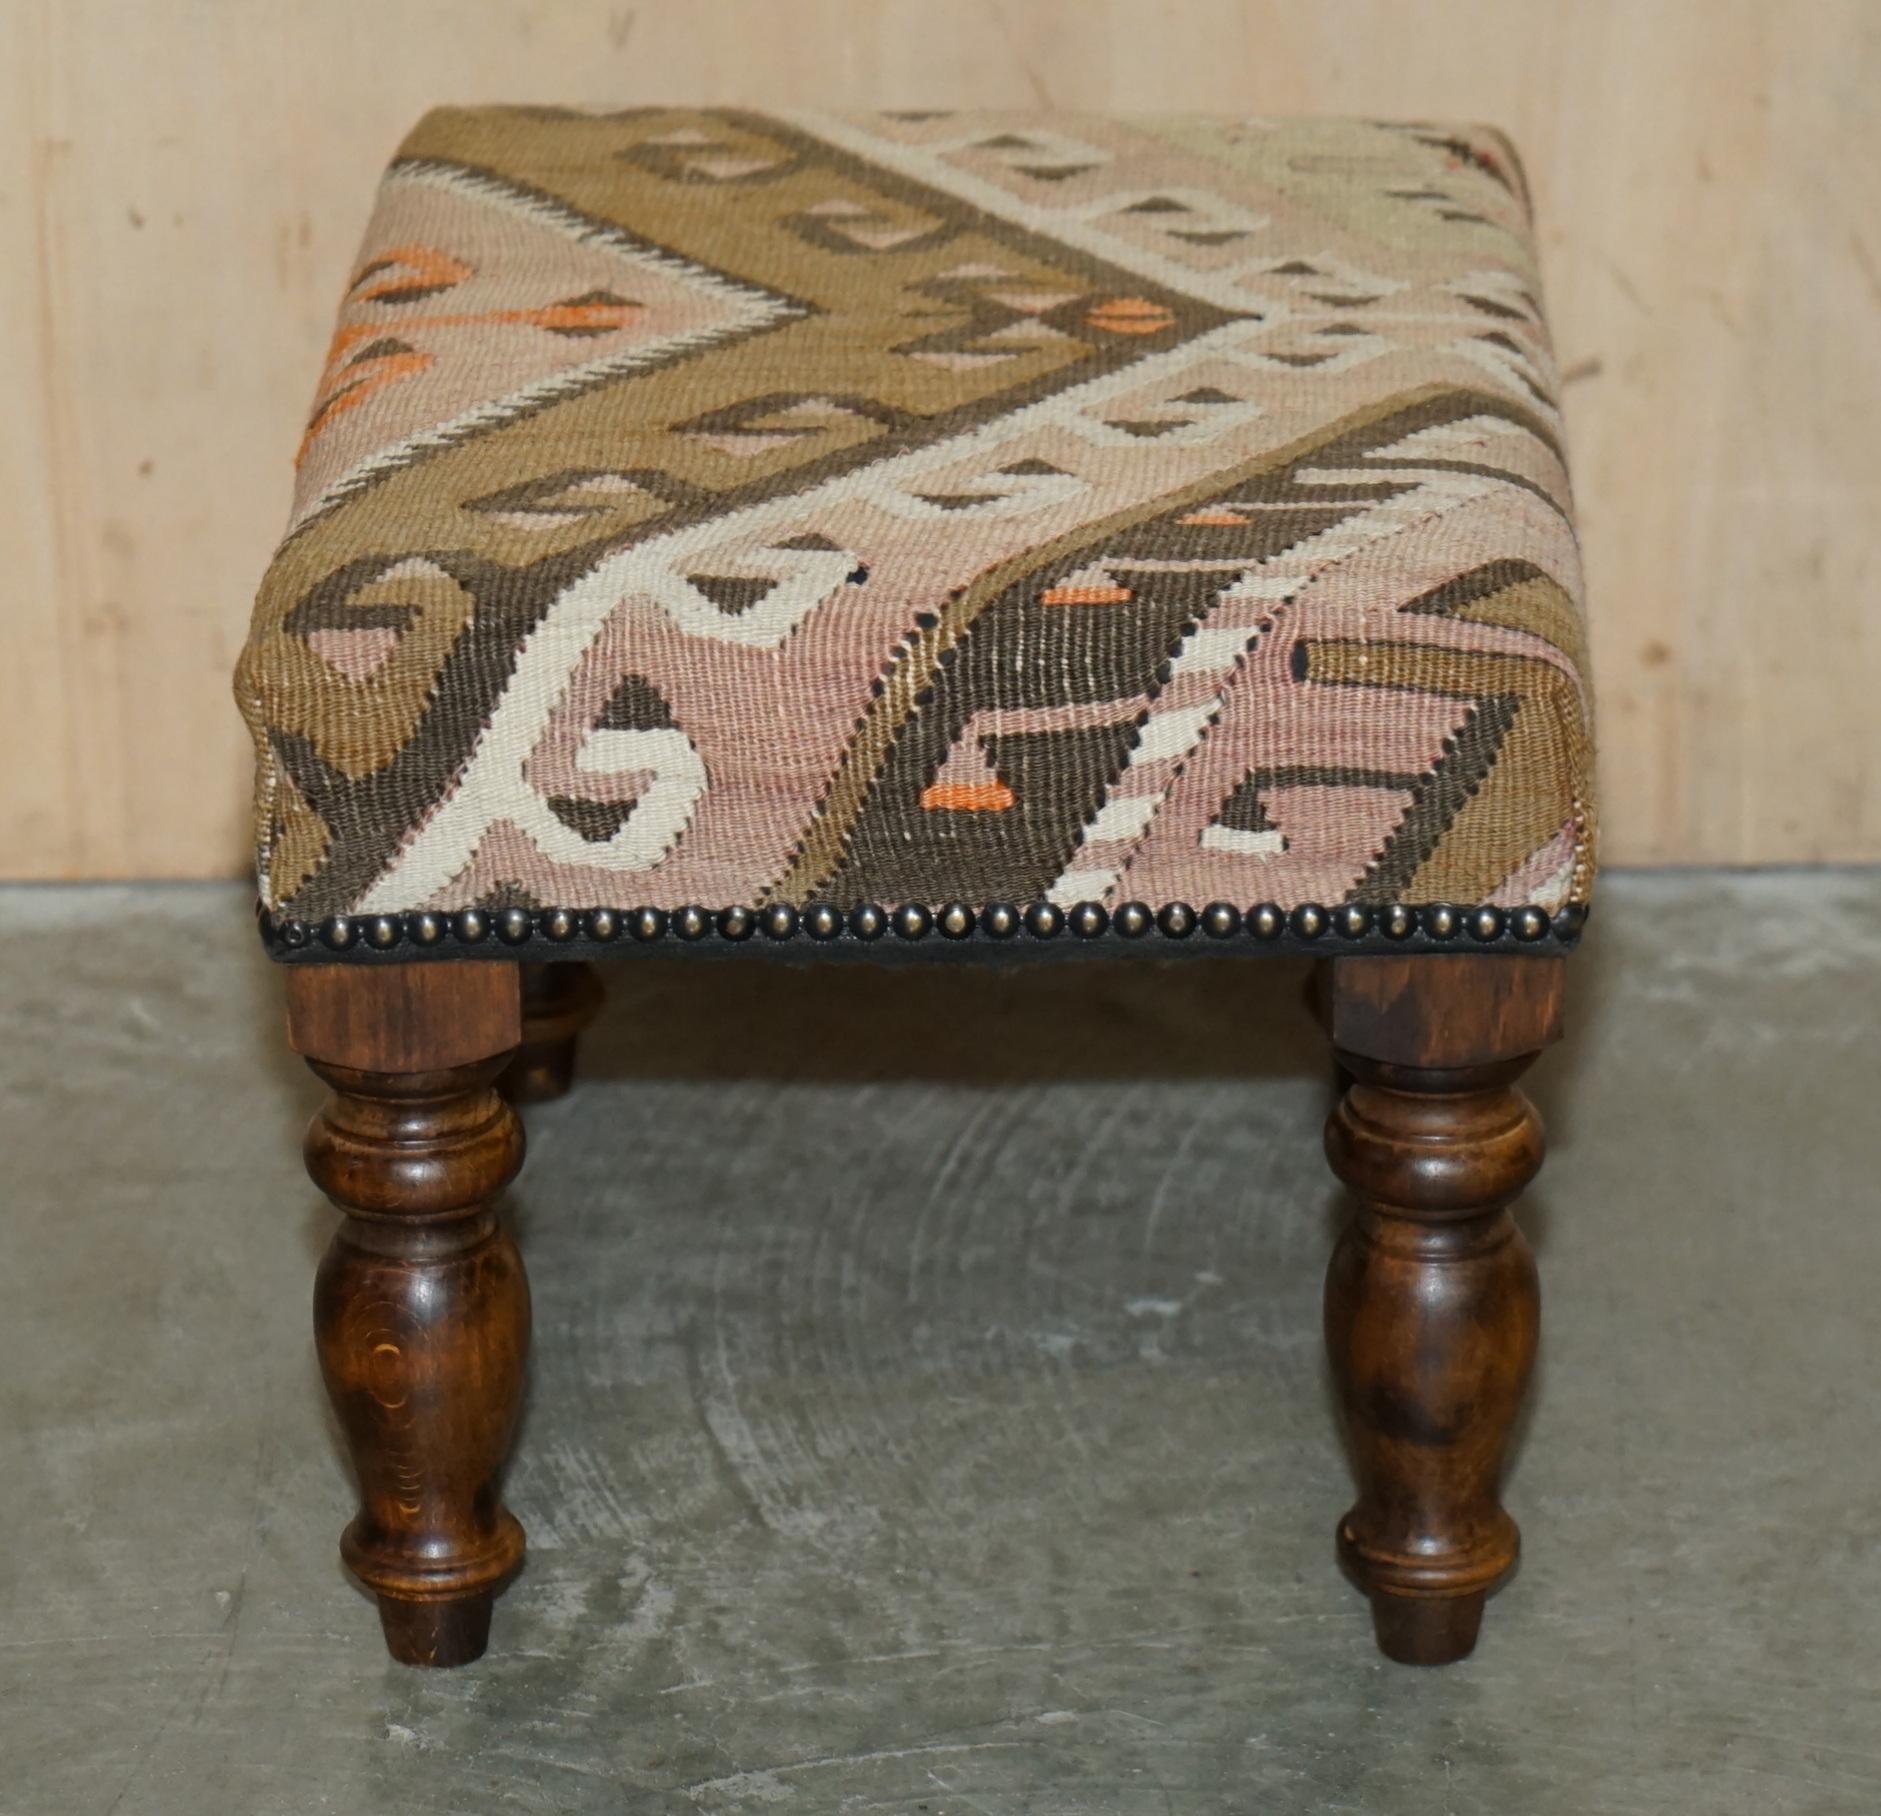 STUNNiNG & COLLECTABLE GEORGE SMITH CHELSEA KILIM FOOTSTOOL OTTOMAN en vente 2